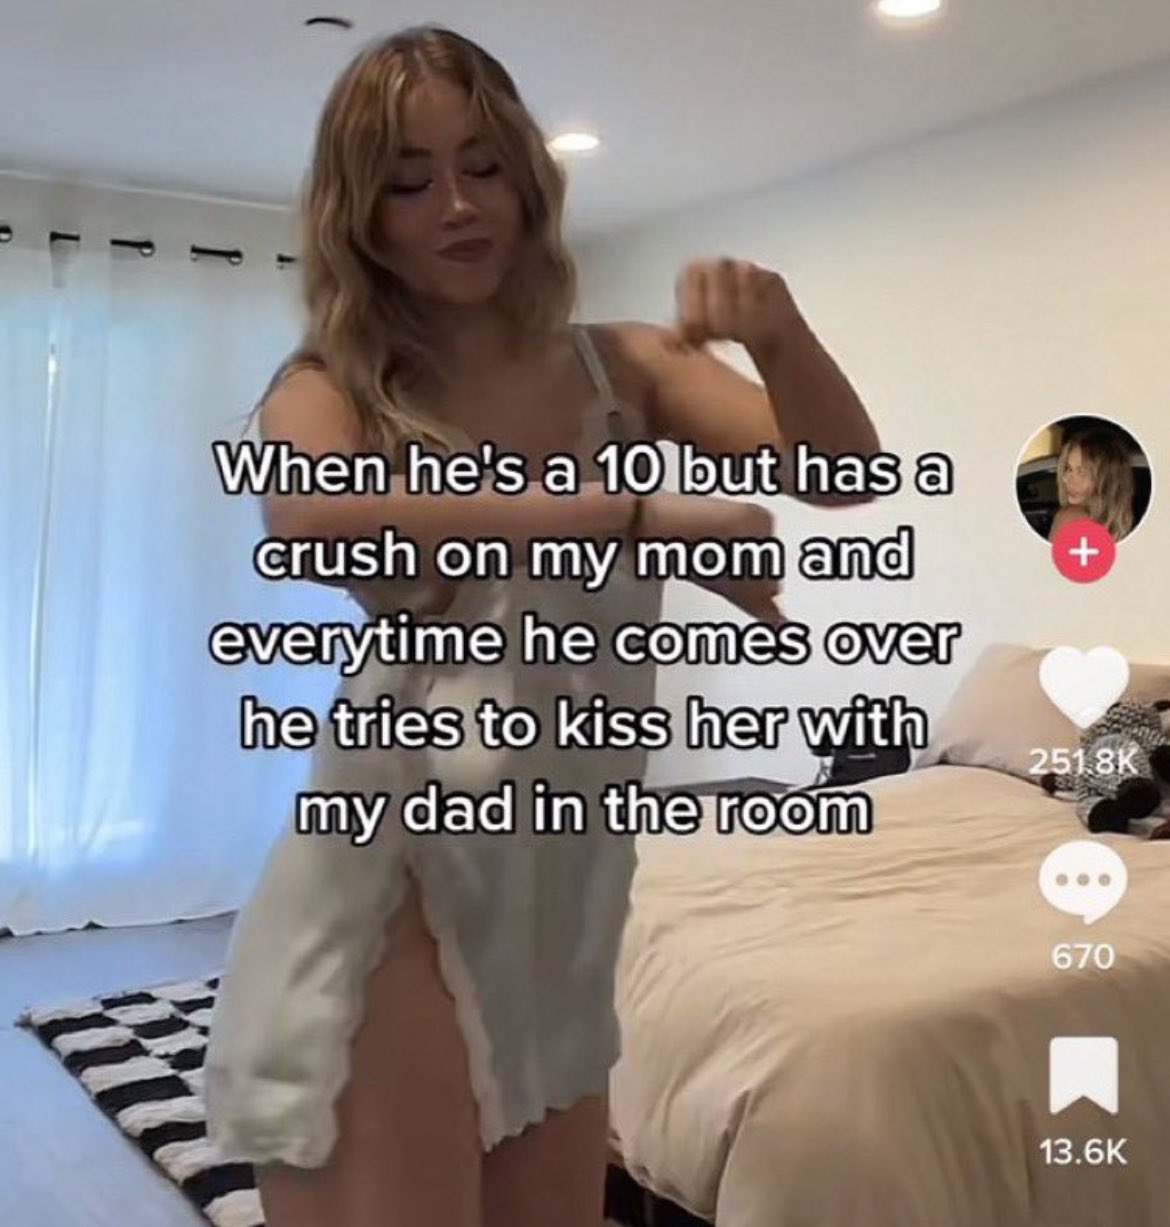 wild tiktok screenshots - he is 10 and has a crush - Bud When he's a 10 but has a crush on my mom and everytime he comes over he tries to kiss her with my dad in the room 670